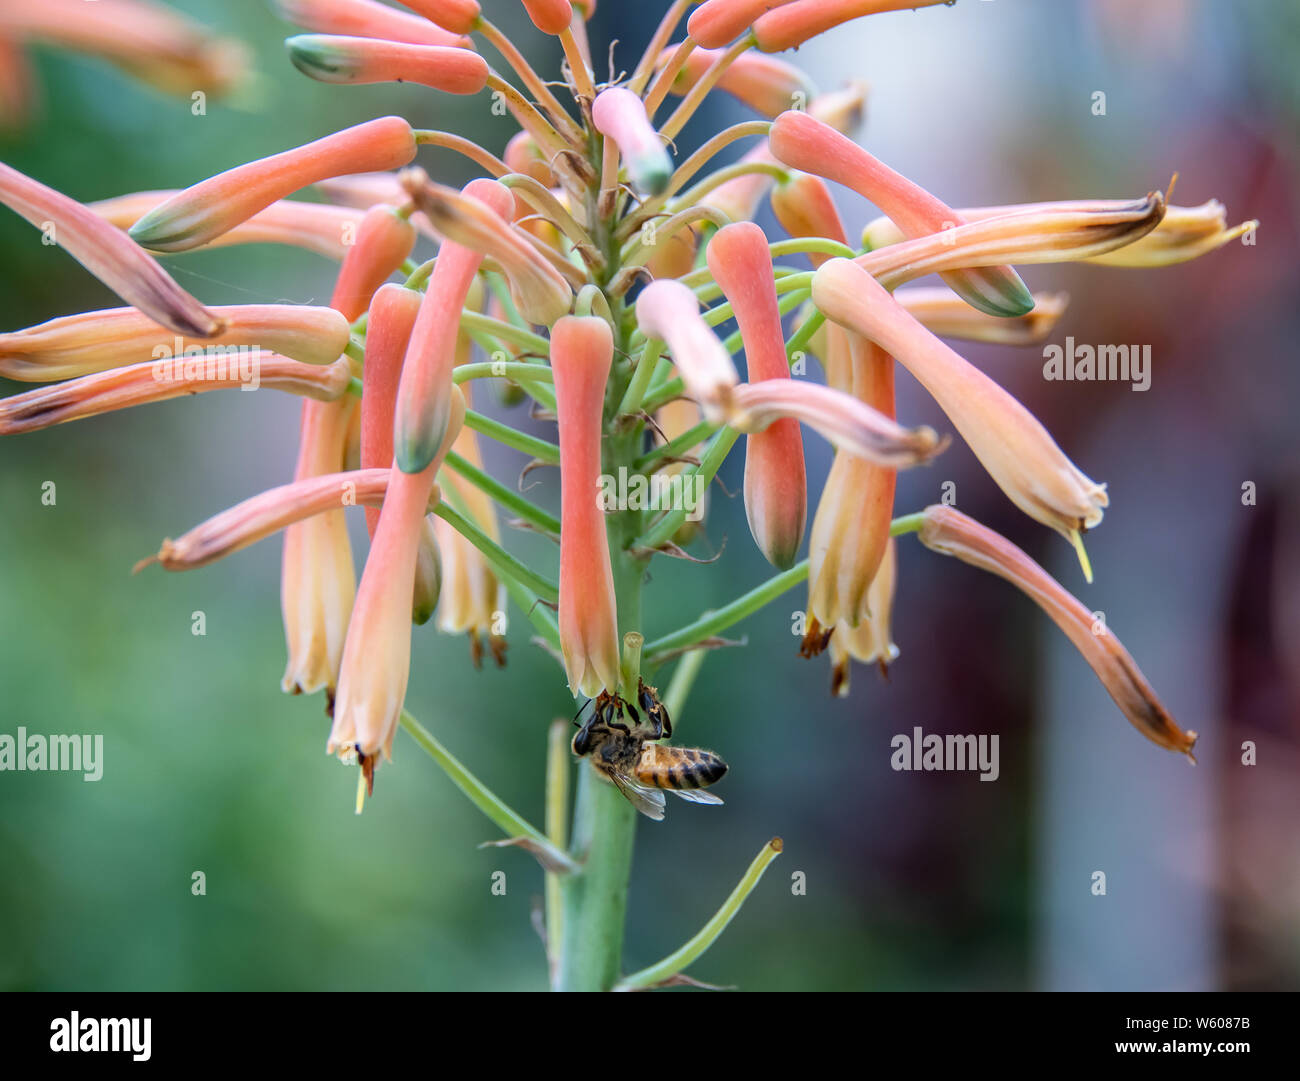 Fire bush has long blooming tube like flowers with a bee pollinating it (Hamelia patens) Stock Photo